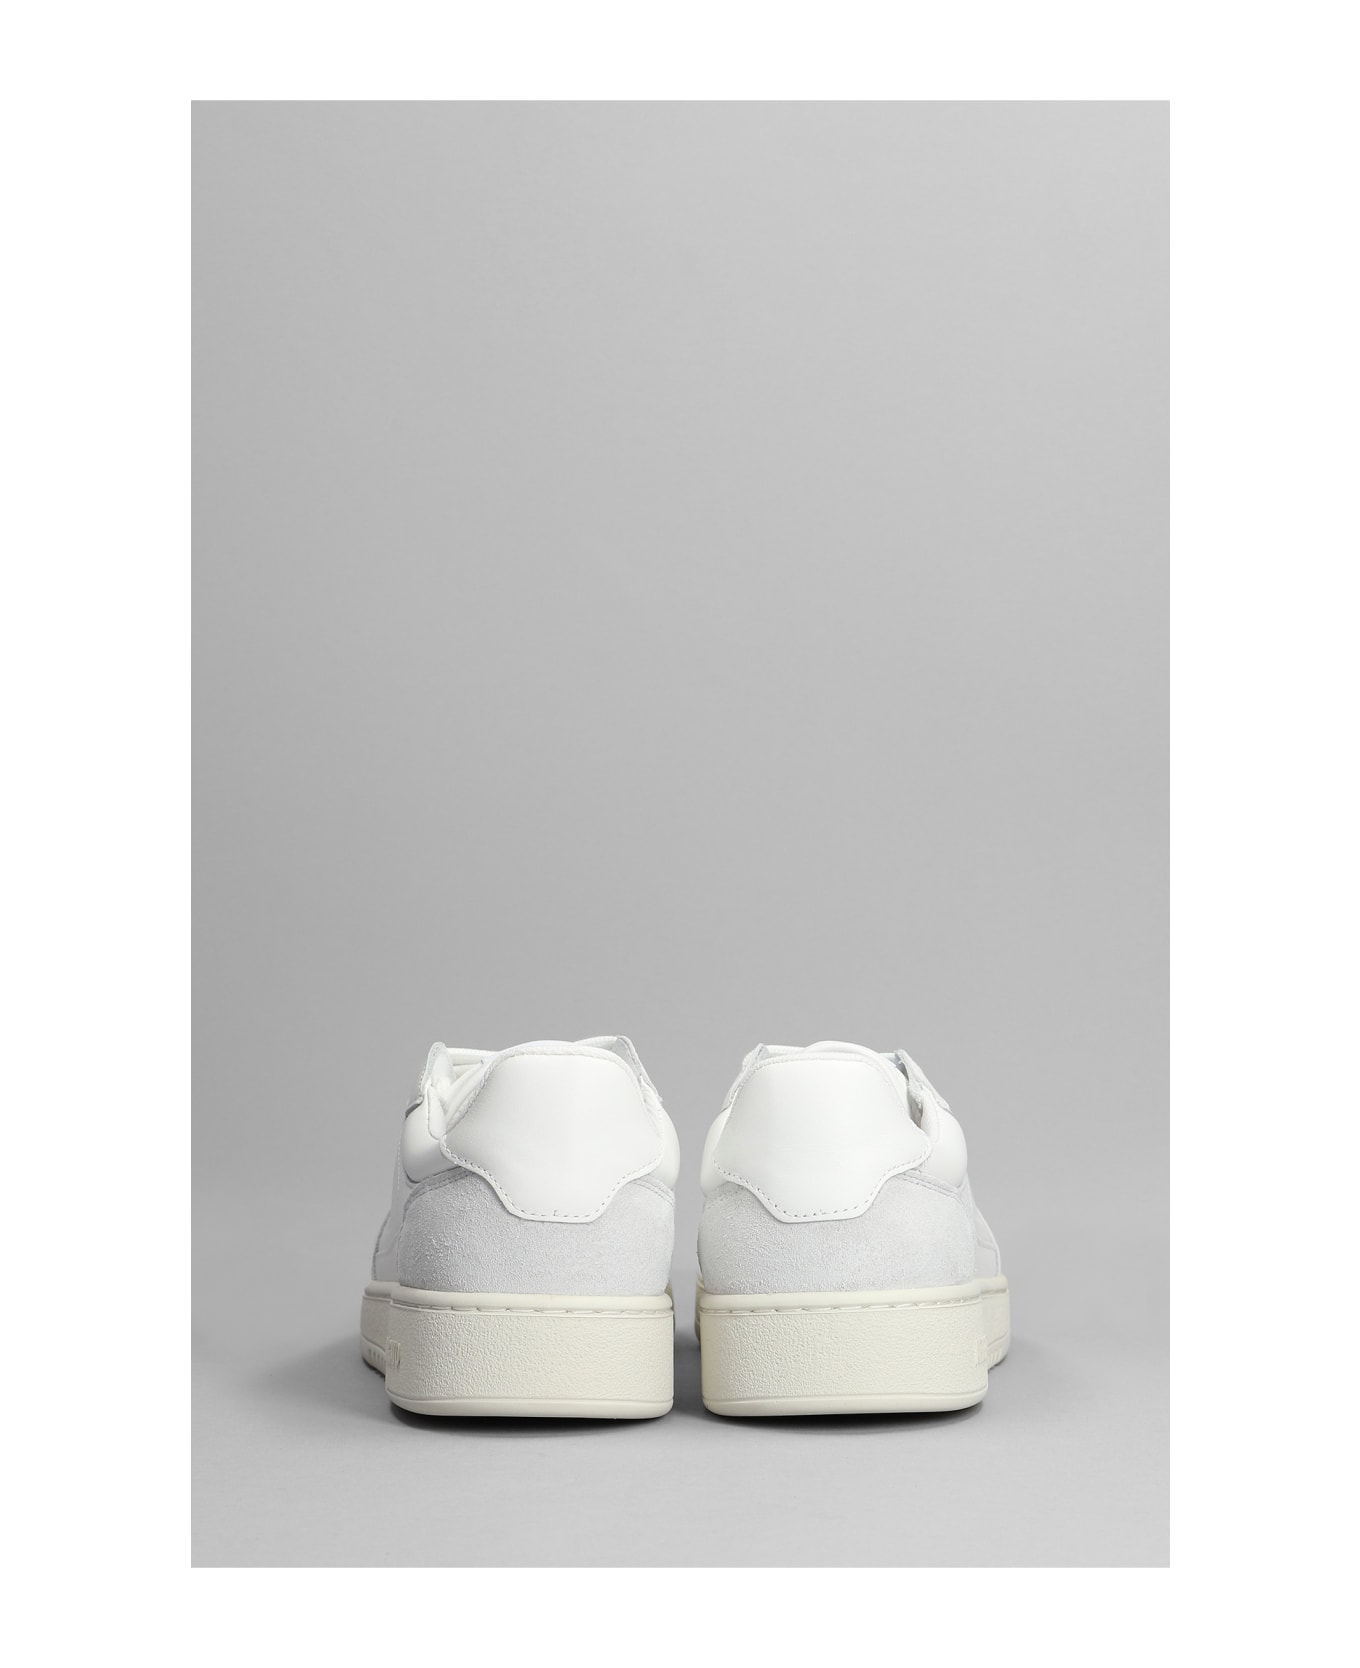 Axel Arigato Dice Lo Sneakers In White Leather - Bianco スニーカー